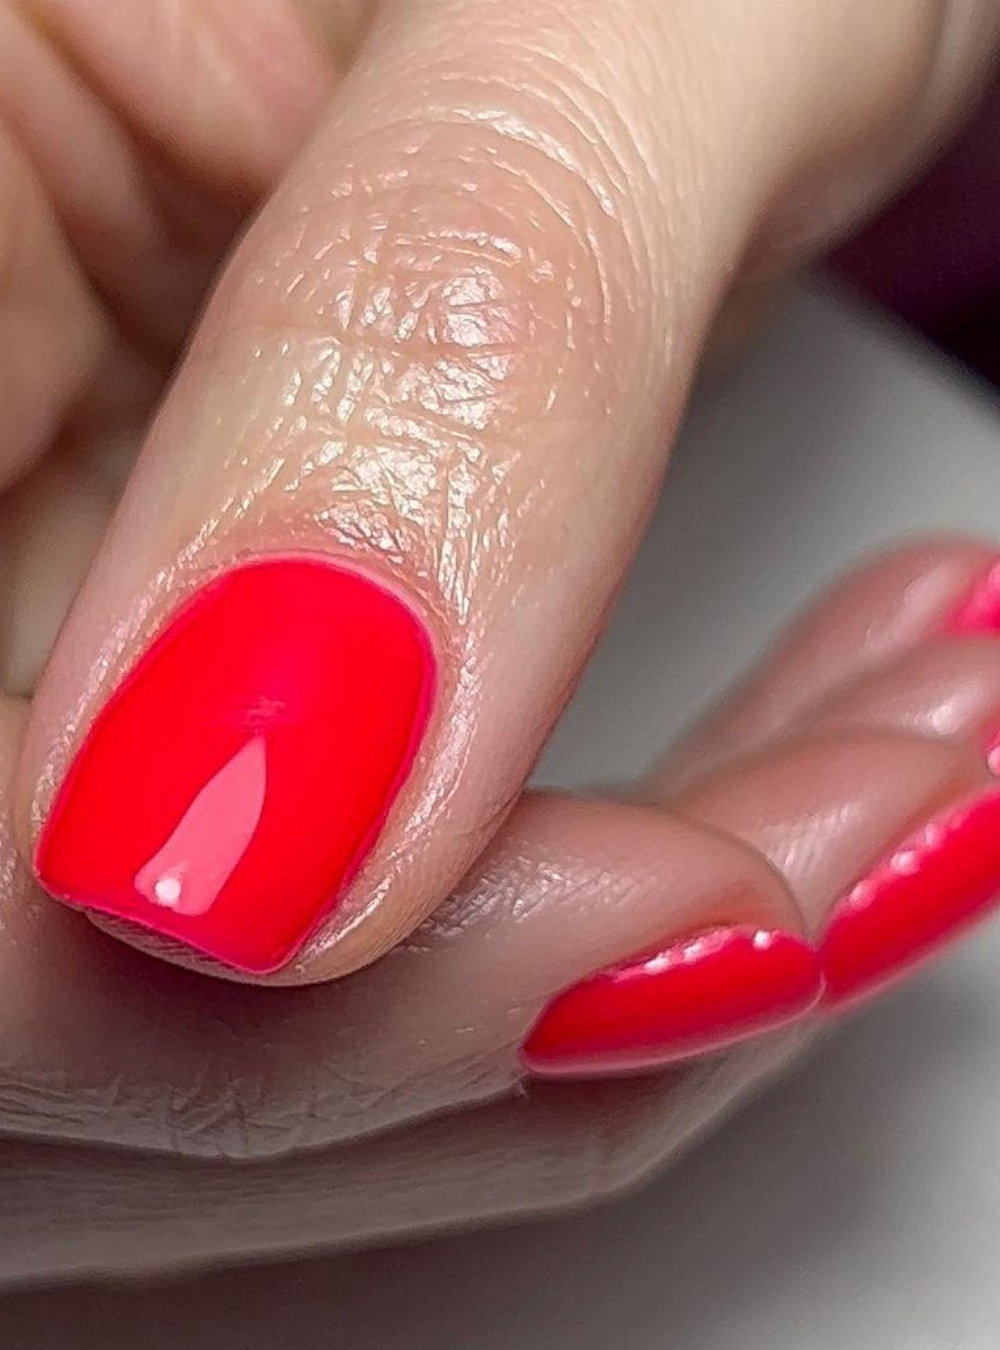 A close up of fingernails painted bright red.